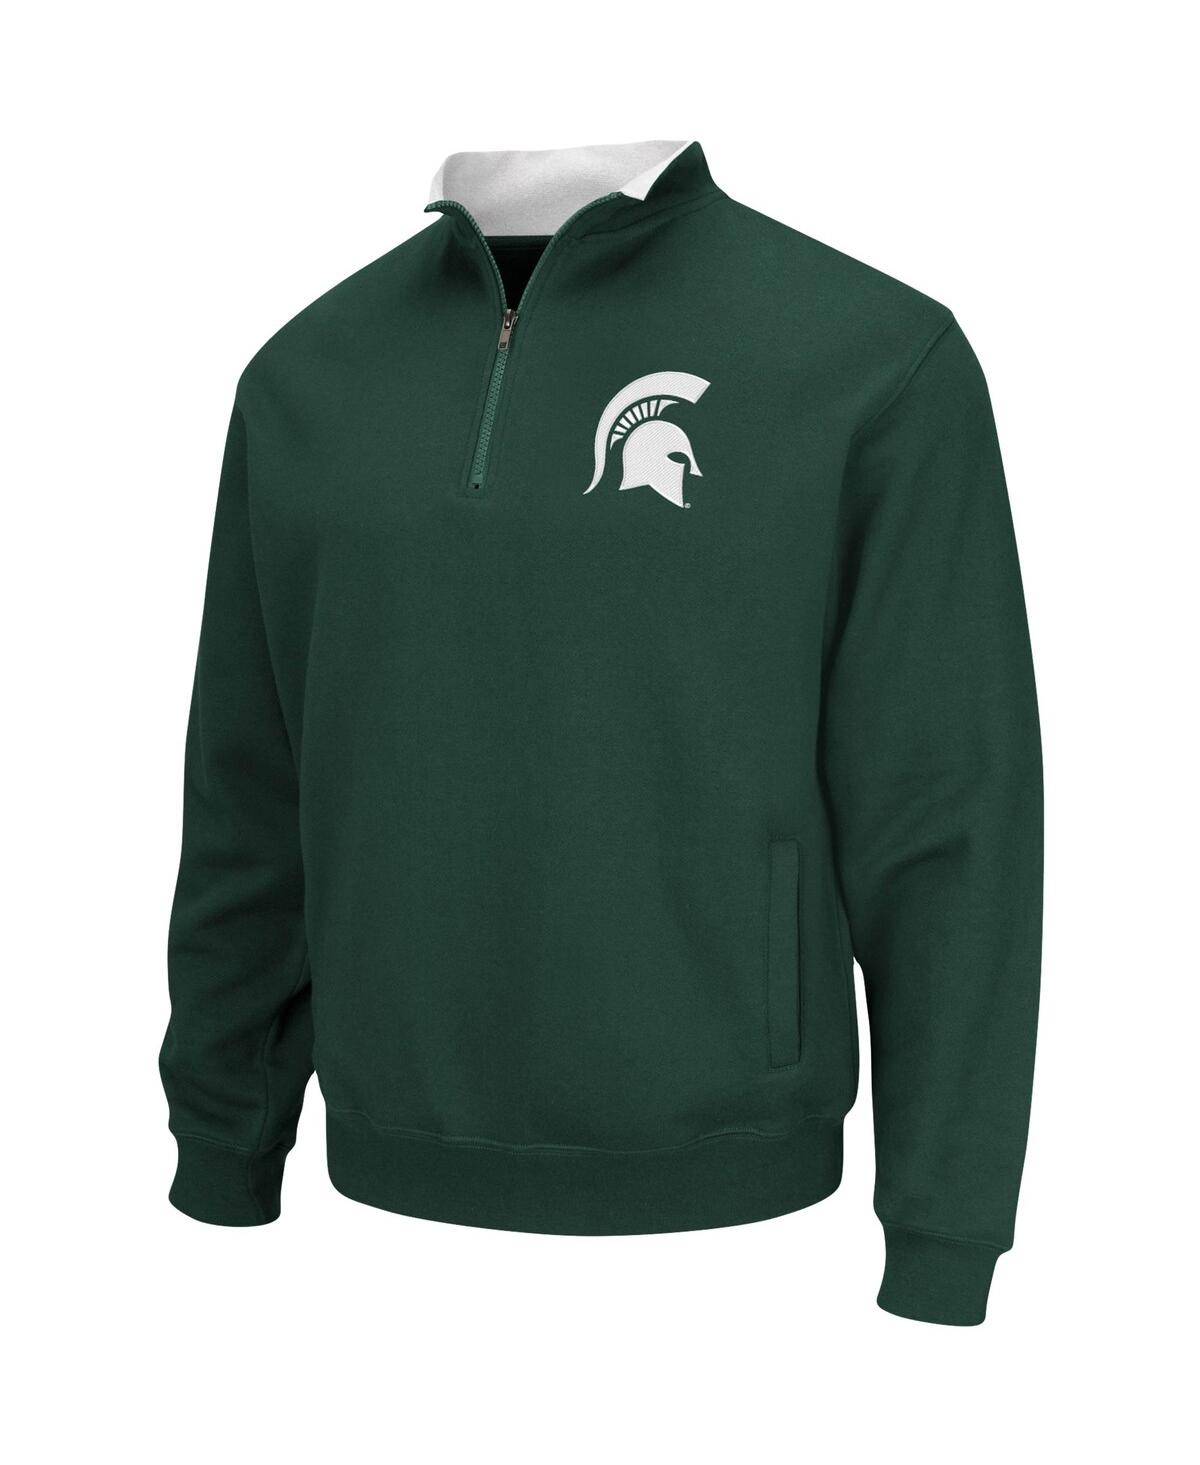 Shop Colosseum Men's  Green Michigan State Spartans Big And Tall Tortugas Quarter-zip Jacket